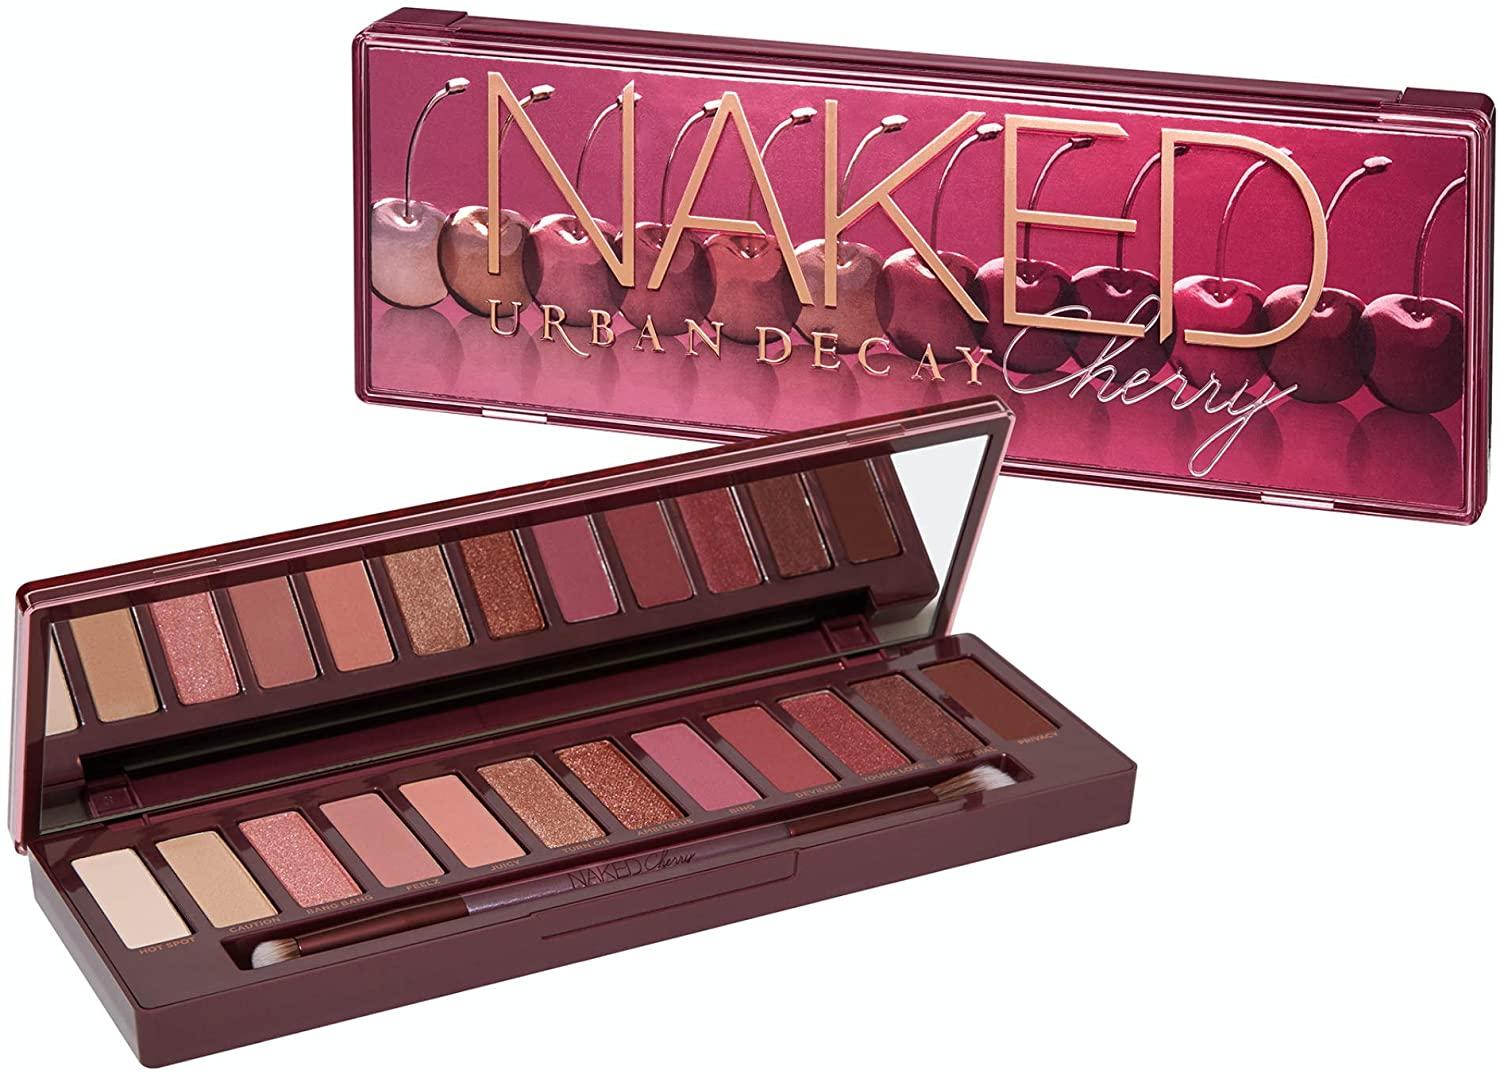 Naked Cherry Eyeshadow Palette for $20.82